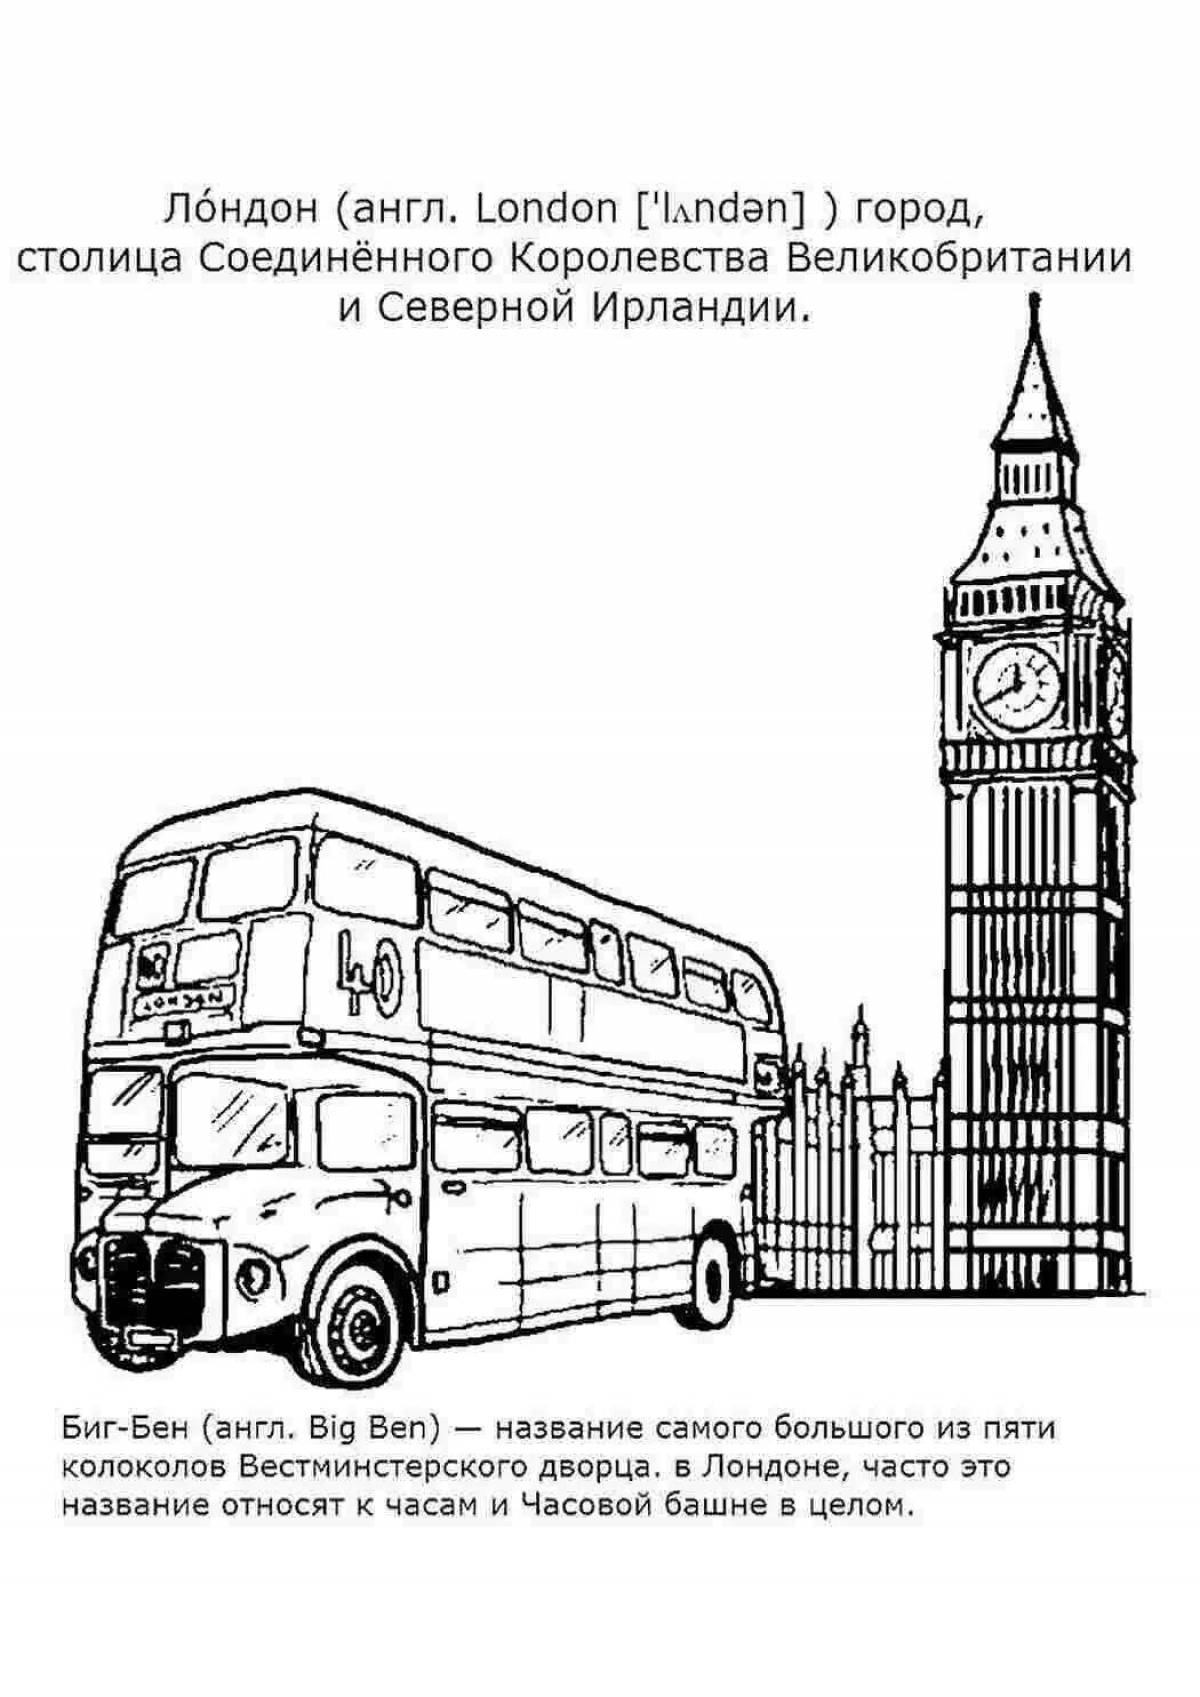 Commemorative coloring book sights of england